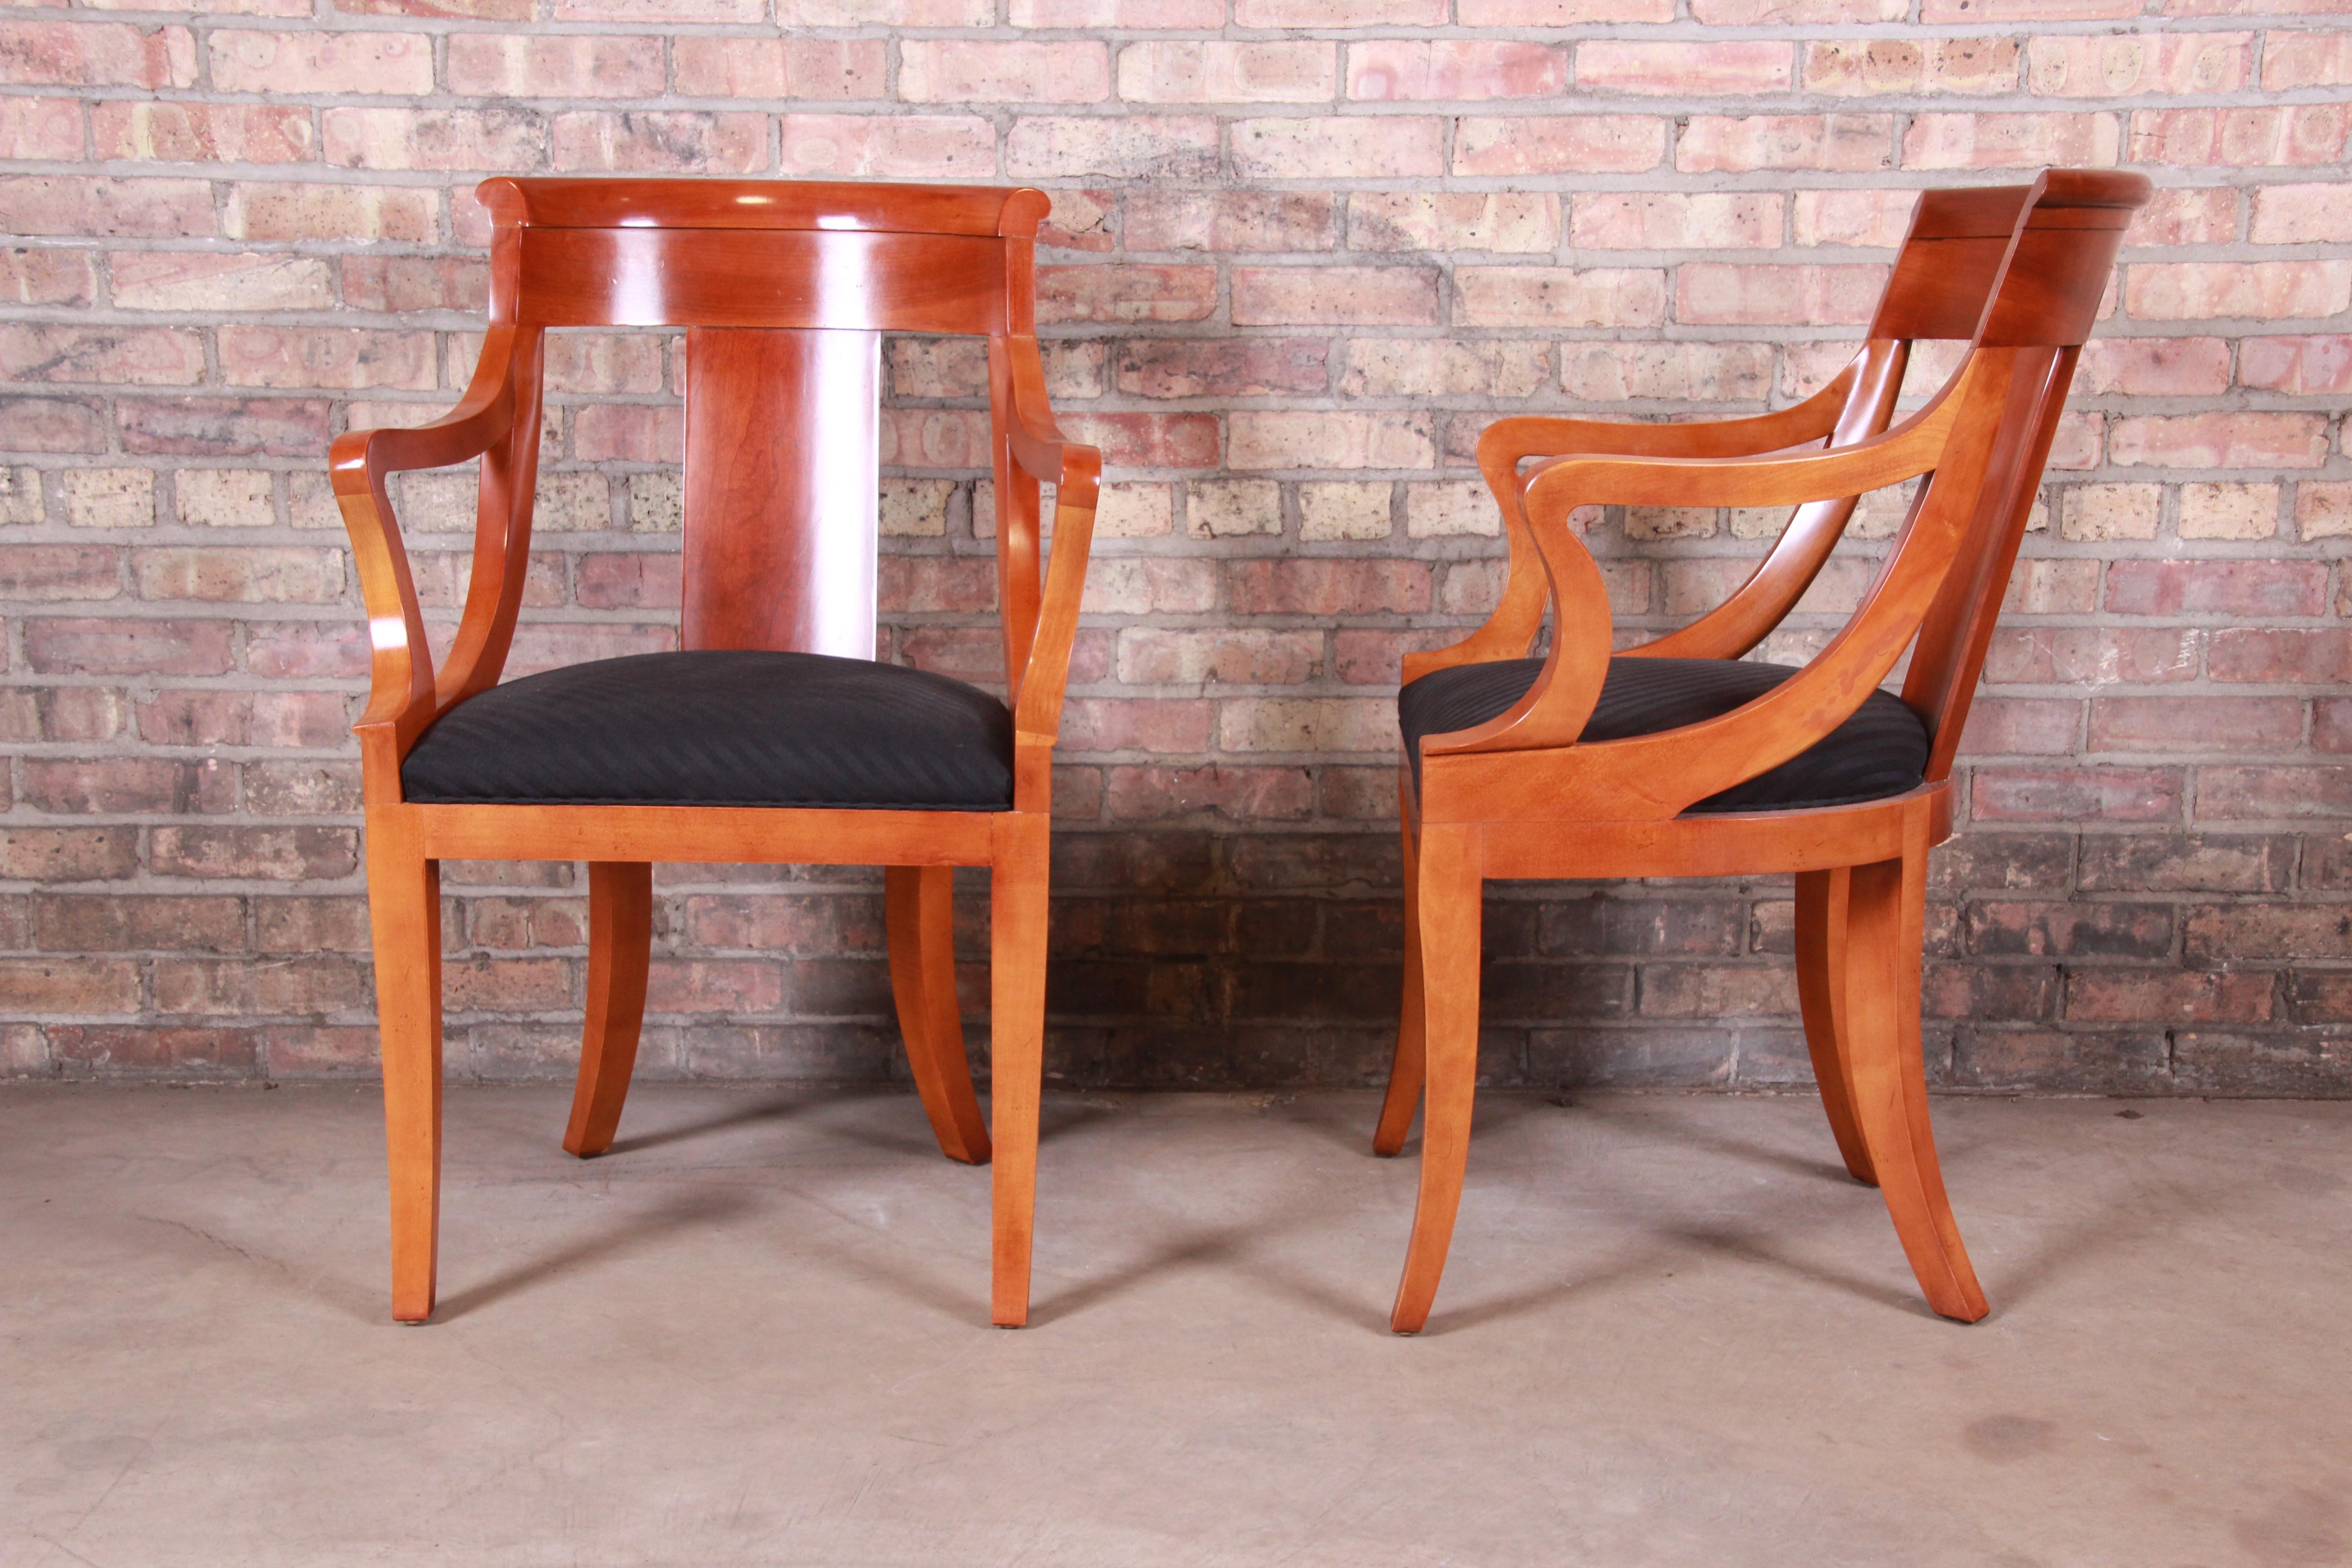 Upholstery Baker Furniture Cherrywood Regency Dining Chairs, Set of Eight